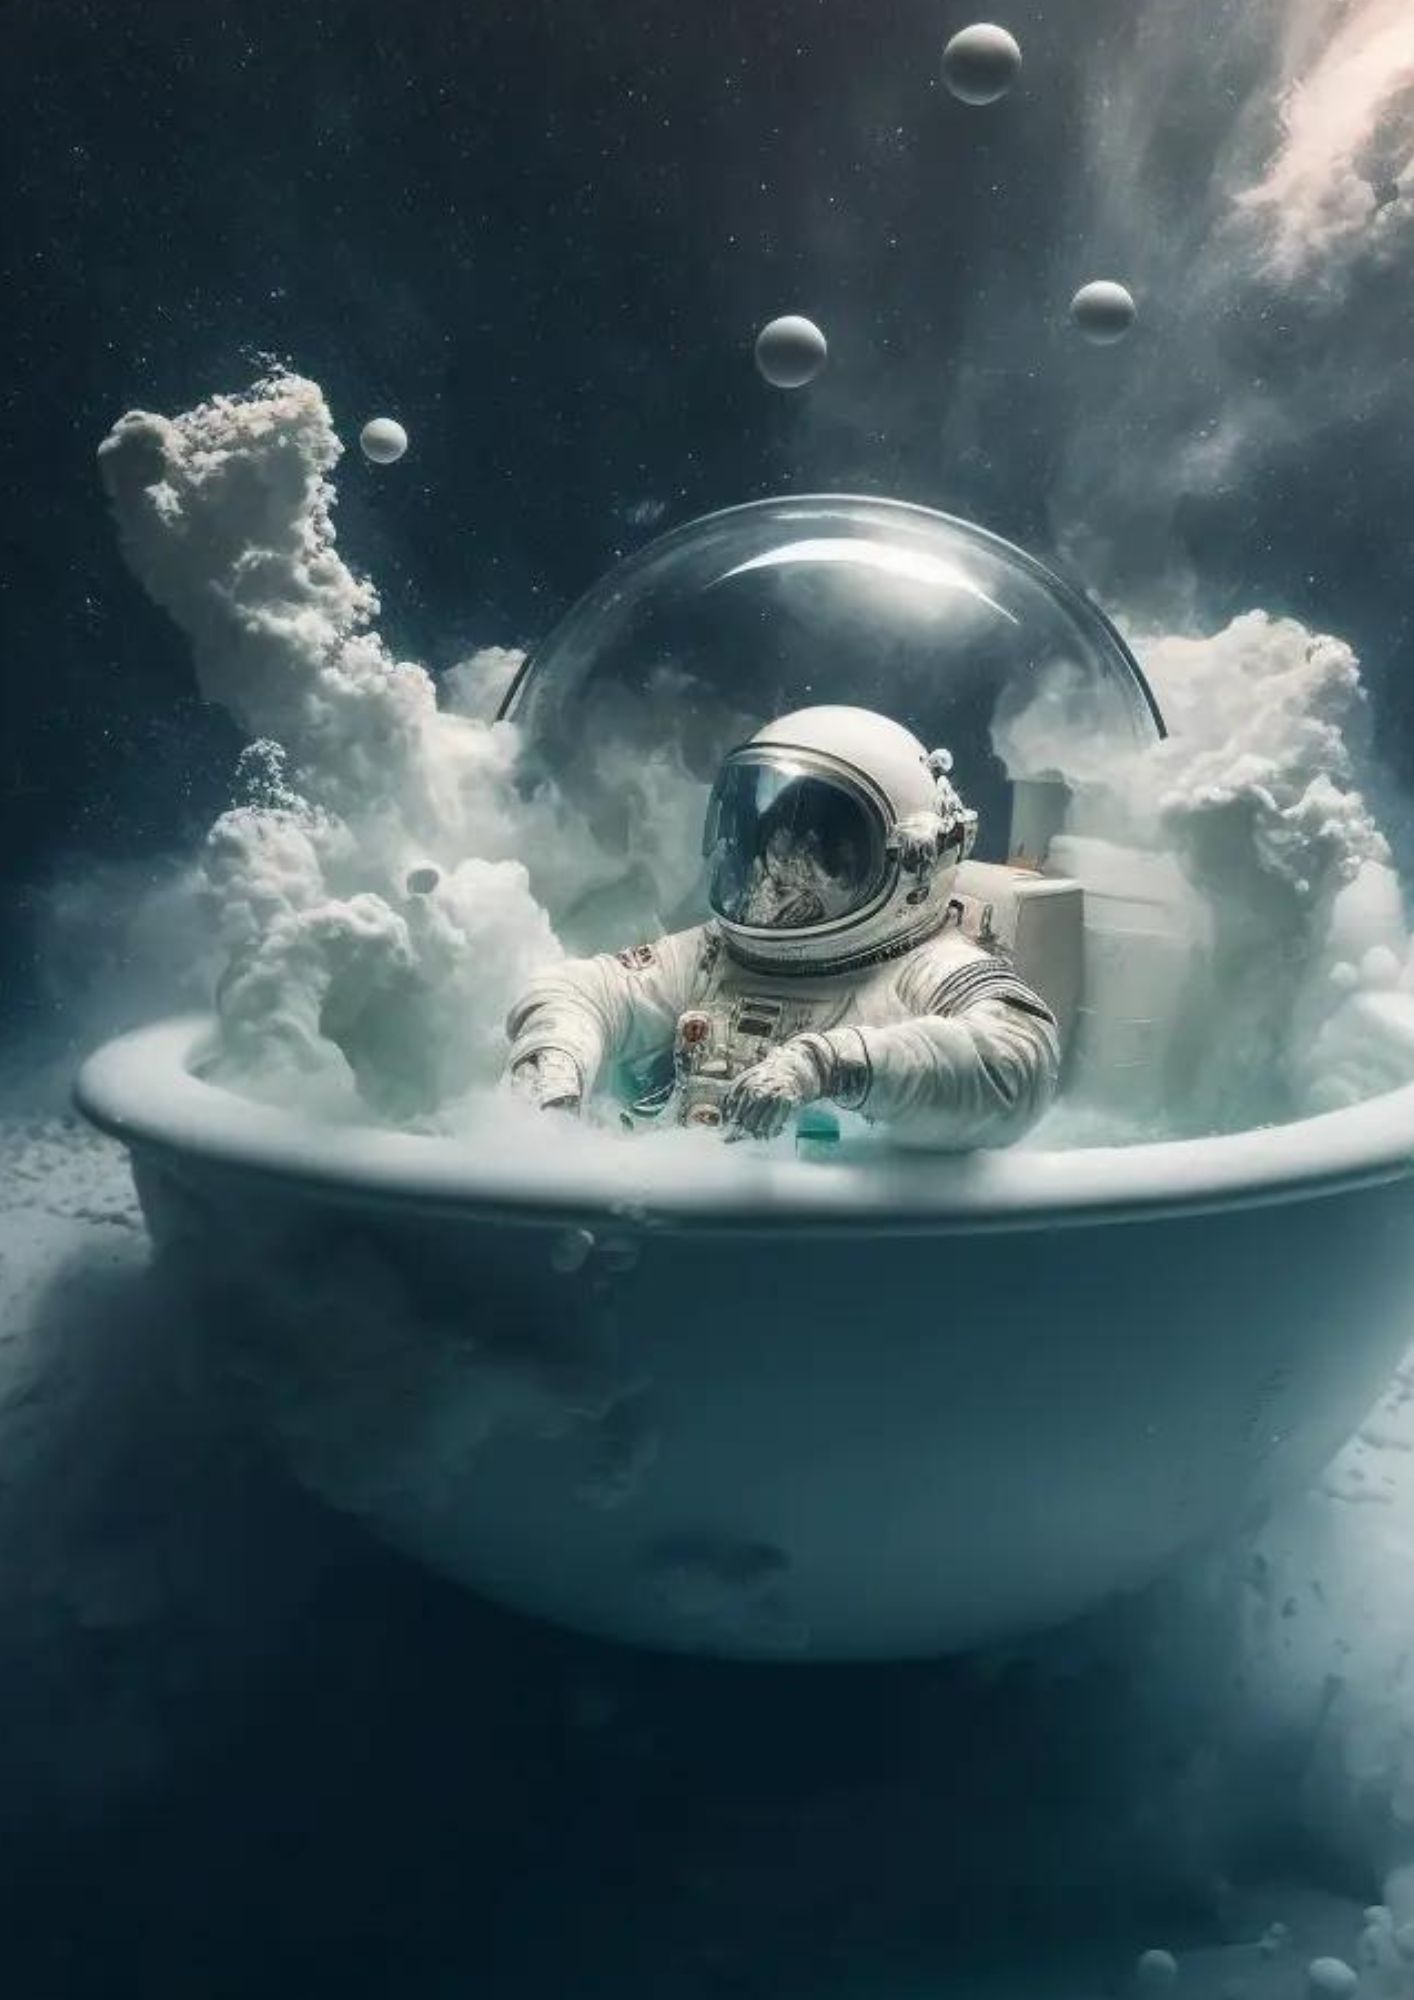 Astronauts wash their hair in space You will be surprised to read